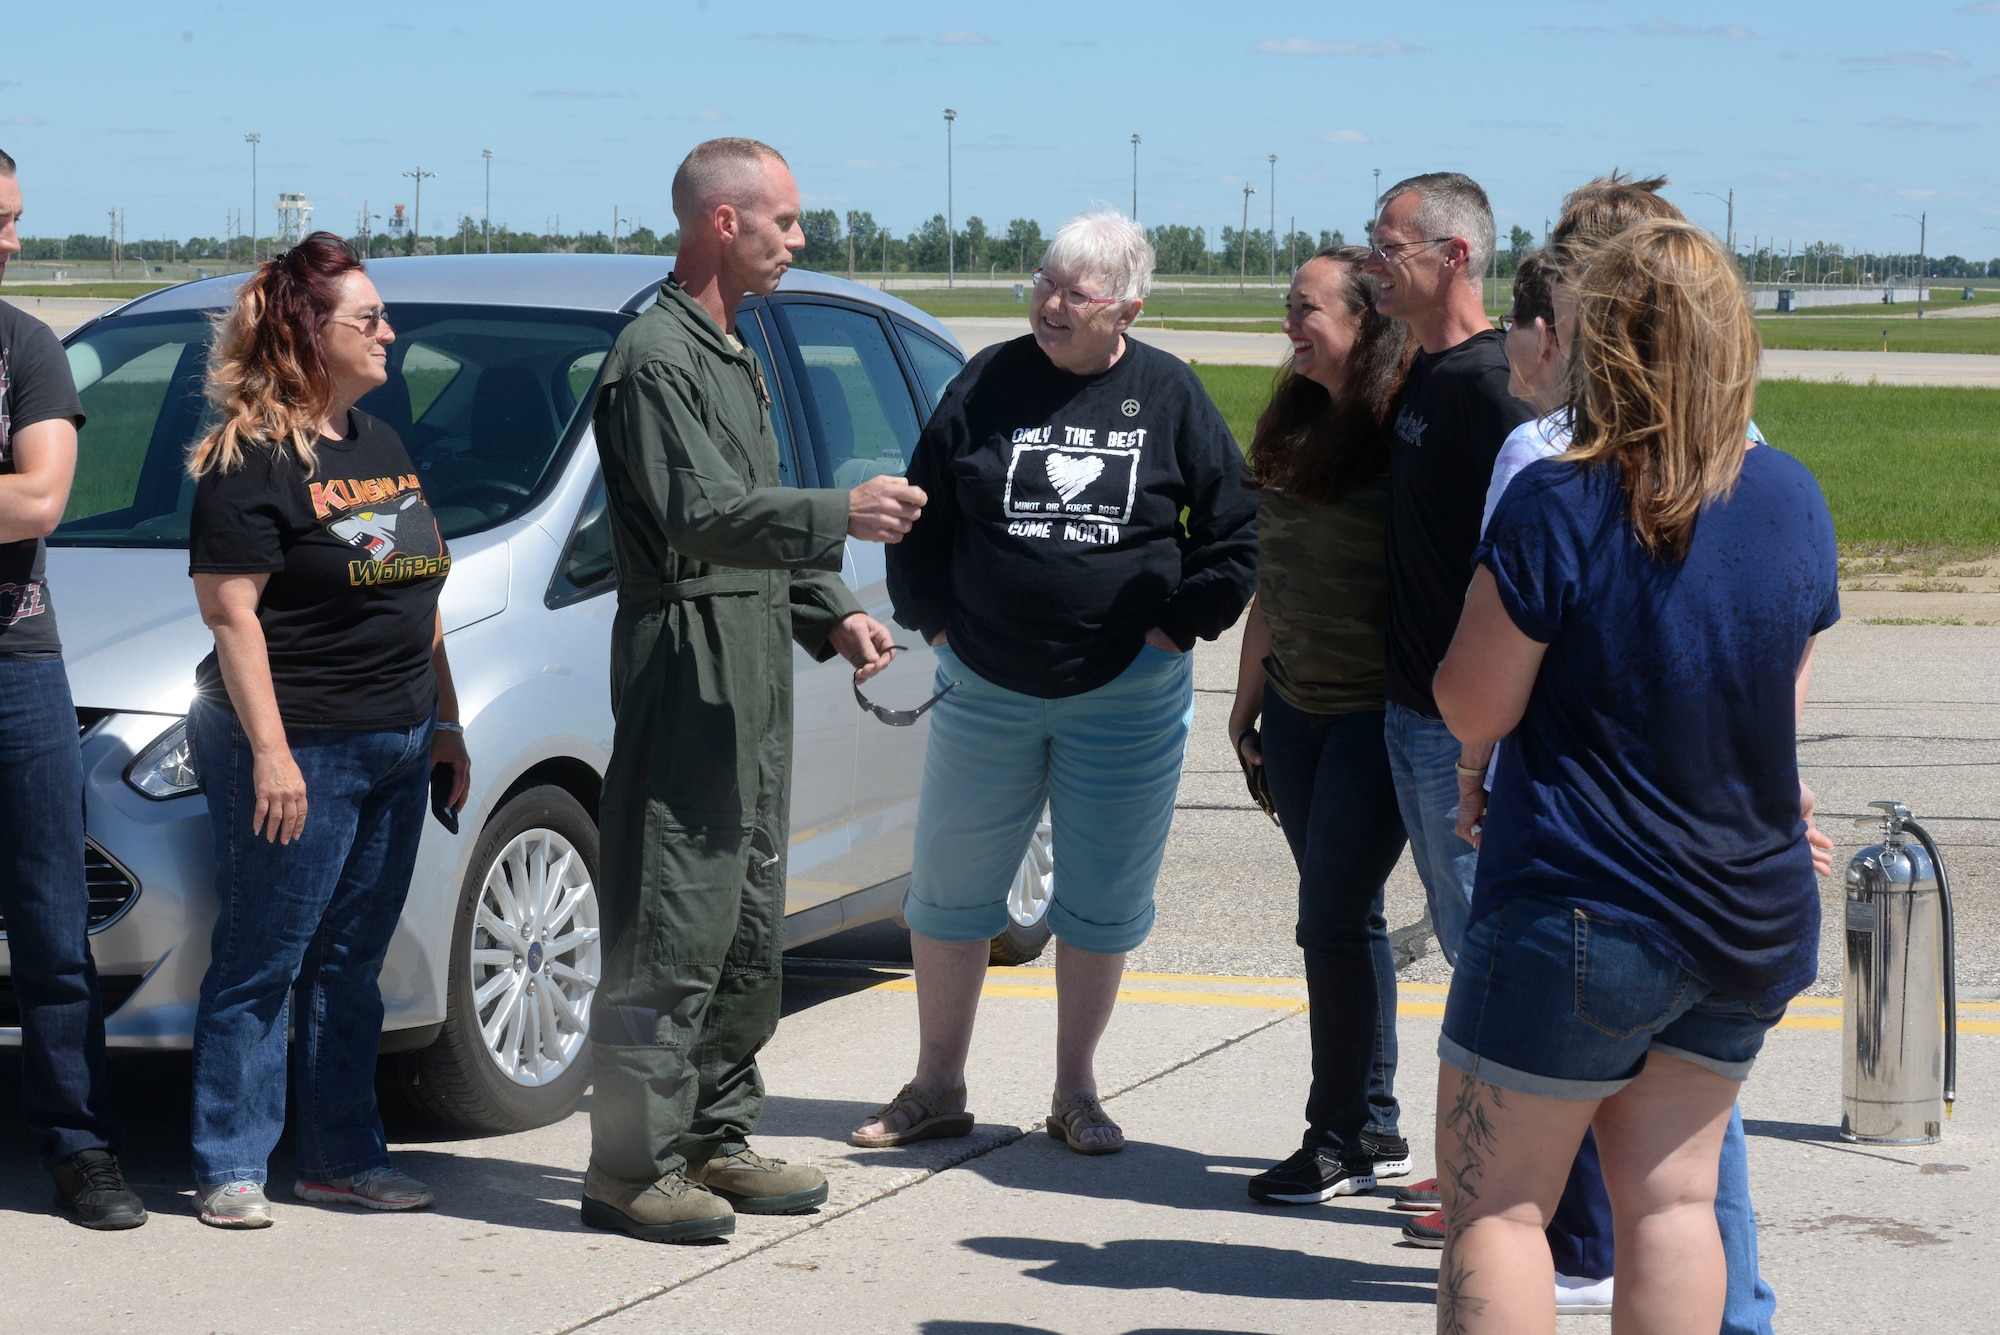 Chief Master Sgt. Geoff Weimer talks with family and friends after celebration of his “fini-flight” at Minot Air Force Base, N.D., June 23, 2016. Weimer retired from active duty June 24 after 29 years of service to the Air Force. (U.S. Air Force photo/Airman 1st Class Jessica Weissman)